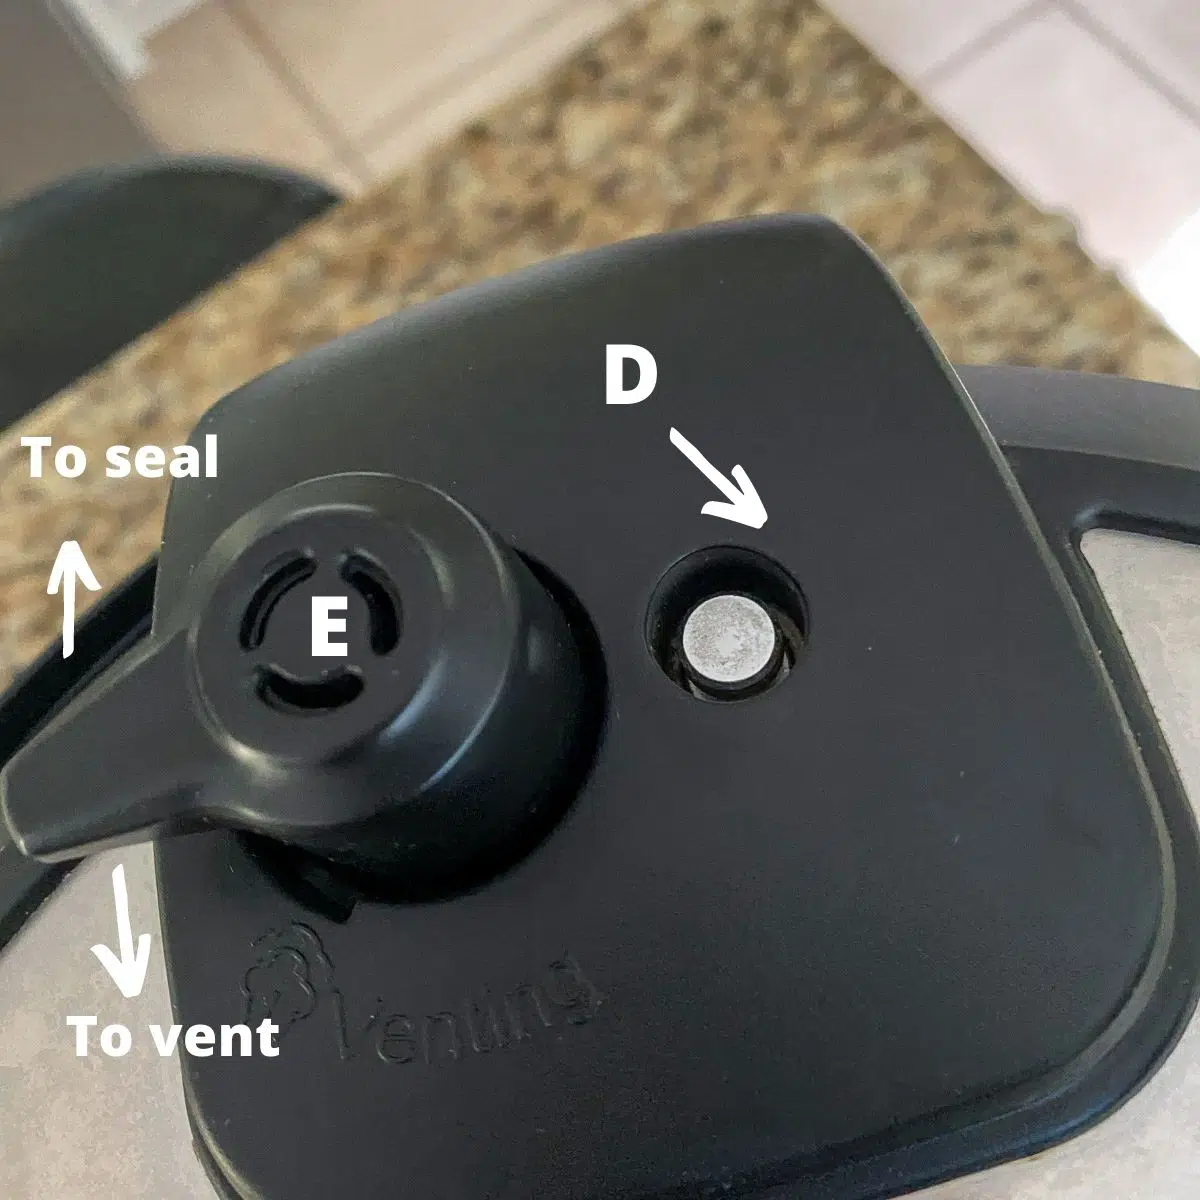 The top of an instant pot with the float valve and sealing knob depicted